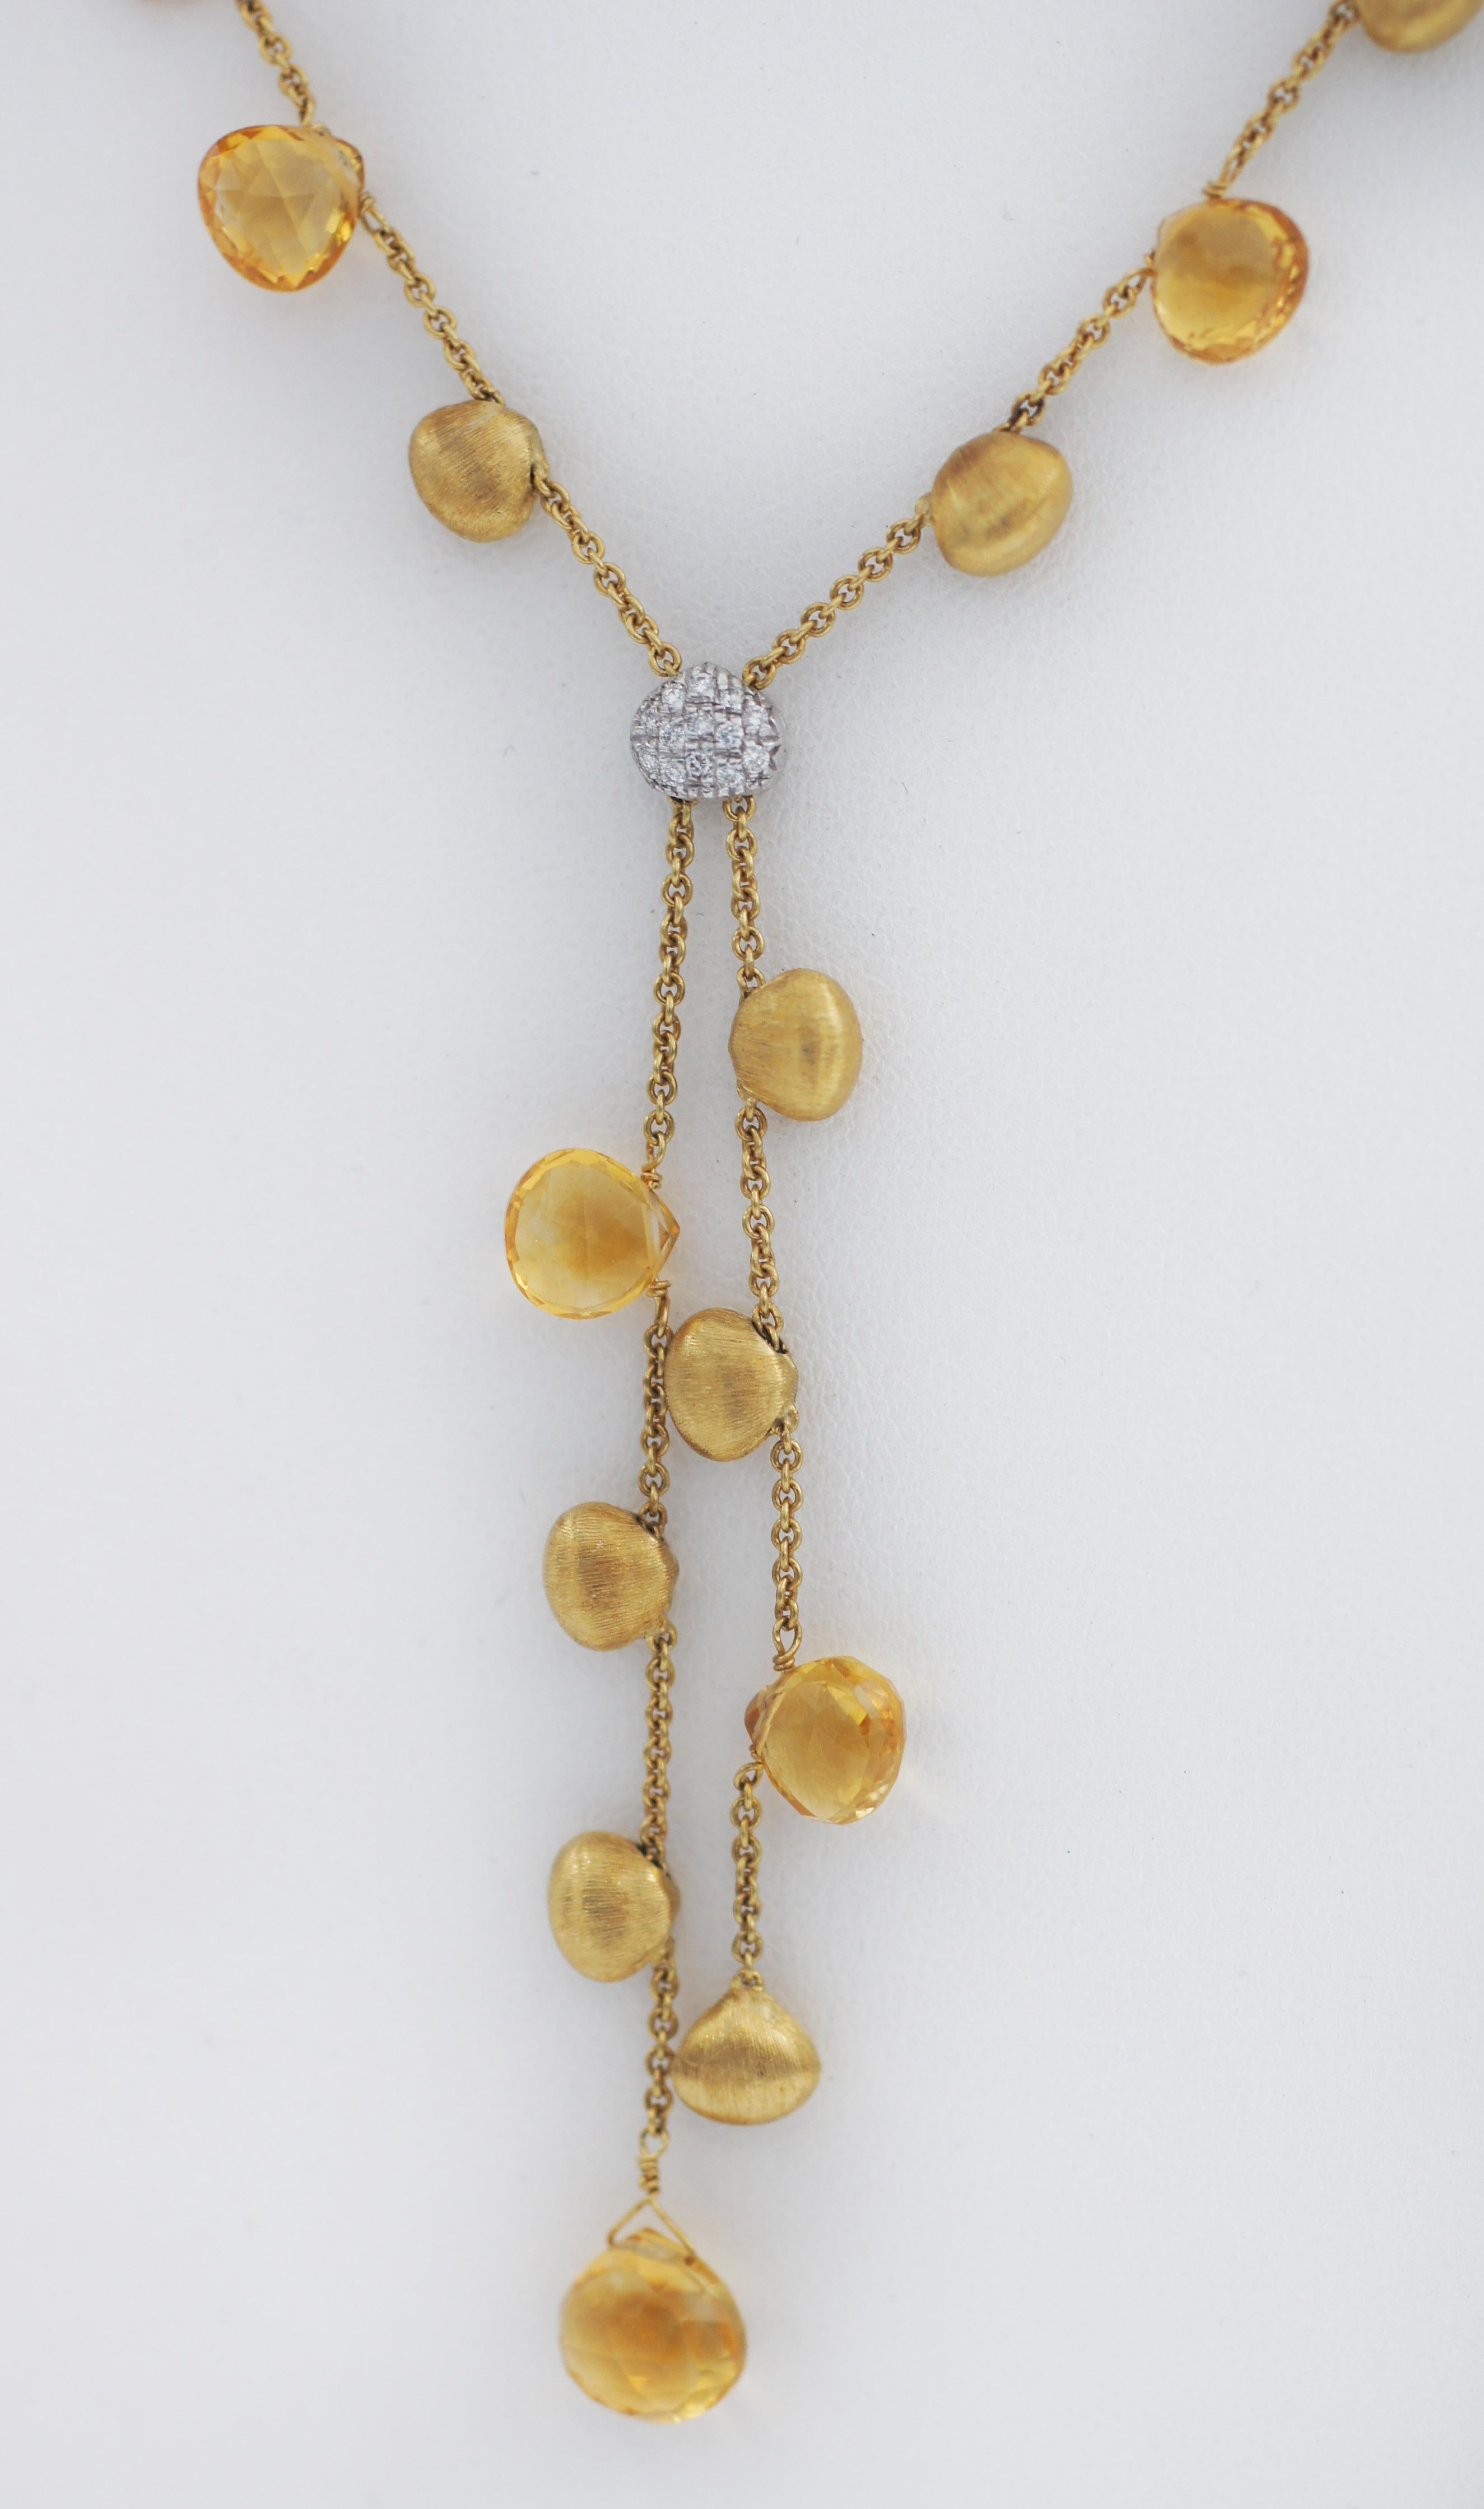 Marco Bicego 
Paradise 
18k yellow gold necklace 
Approx. weighs 17.6g
13 round diamonds, 
Approx. total diamond weight 0.10ct
9 Citrine gemstones
Small Citrine gems measures approx. 7mm x 8mm  
Drop Bottom Citrine gem measures approx. 10mm x 10mm 